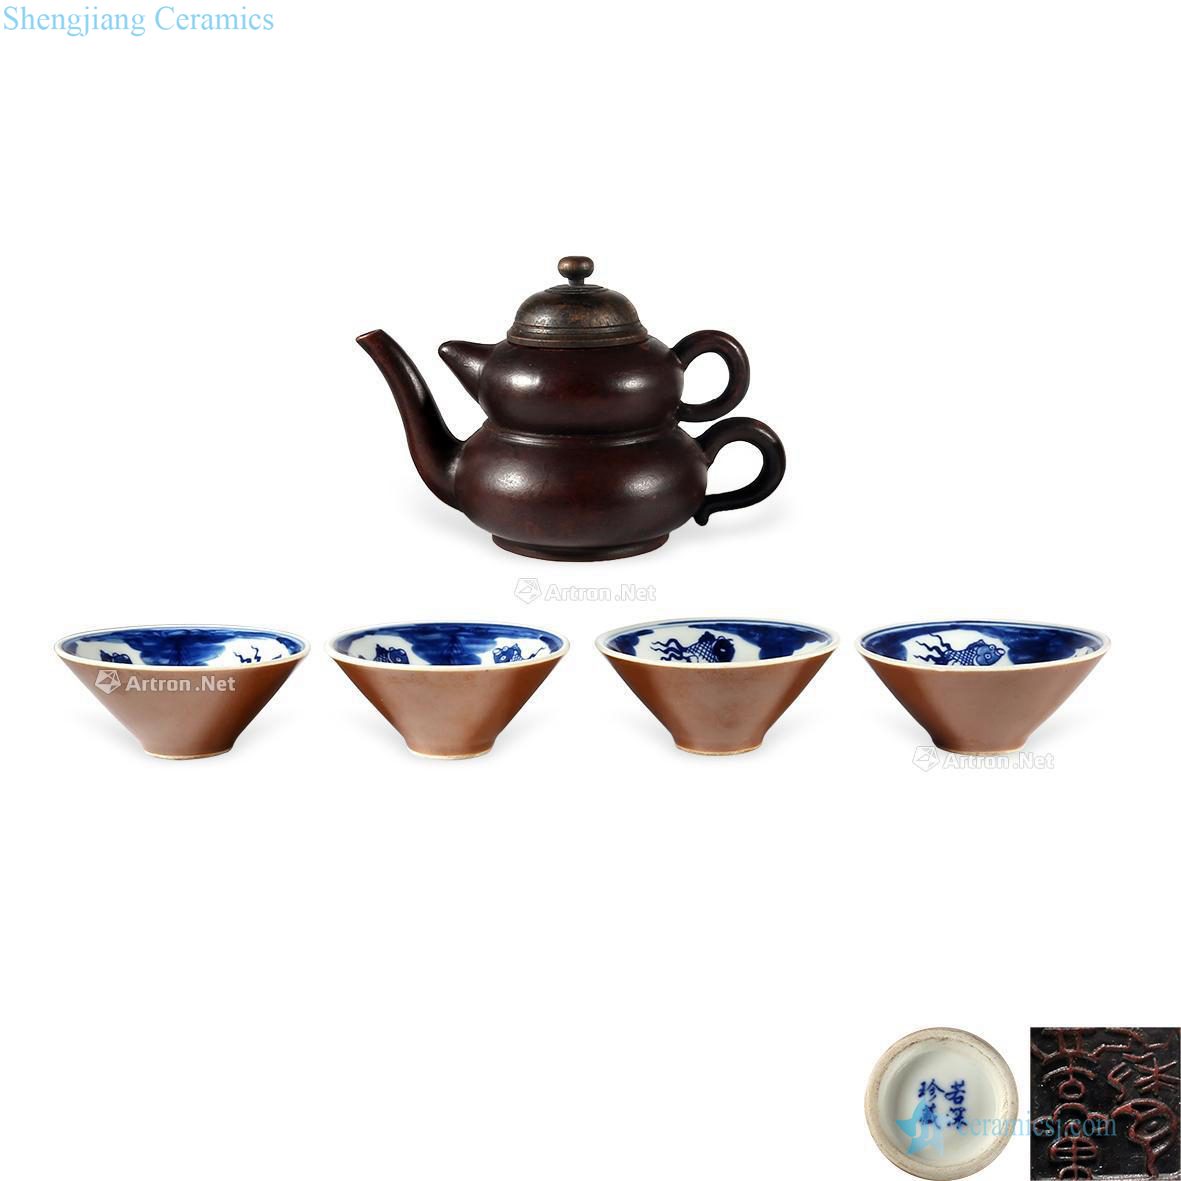 The late Ming dynasty HuiMengChen motorcycling tea sets